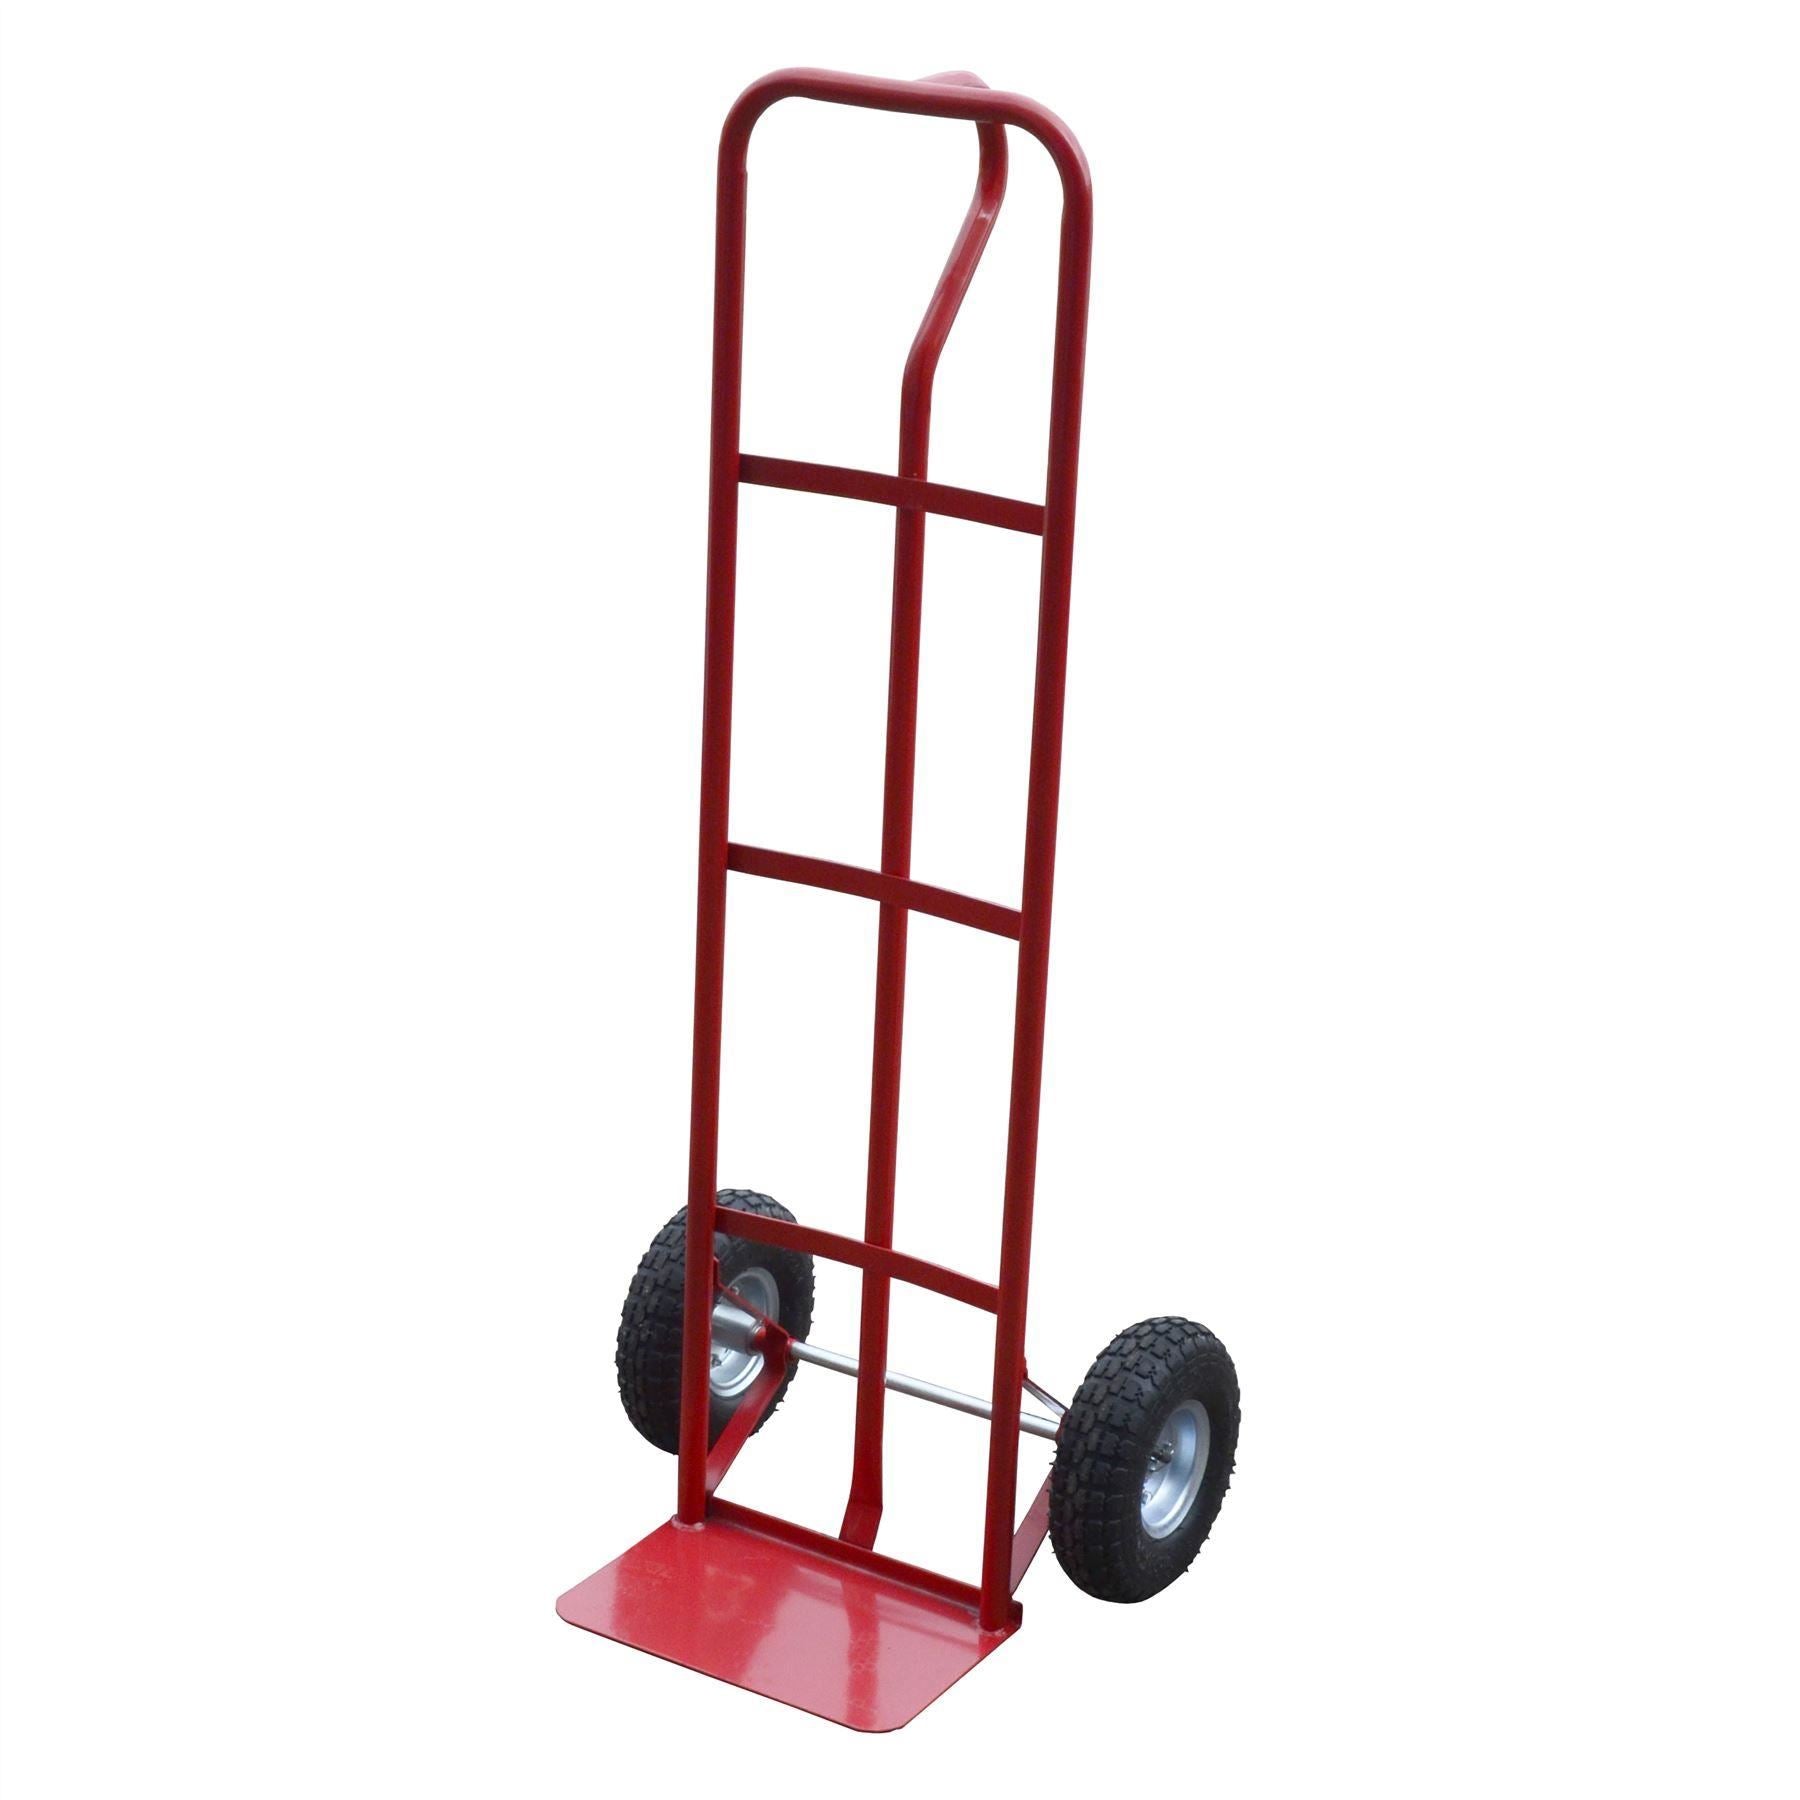 B GRADE Sack Truck 600lb With Pneumatic Wheels Red Steel Hand Trolley Stacker Truck